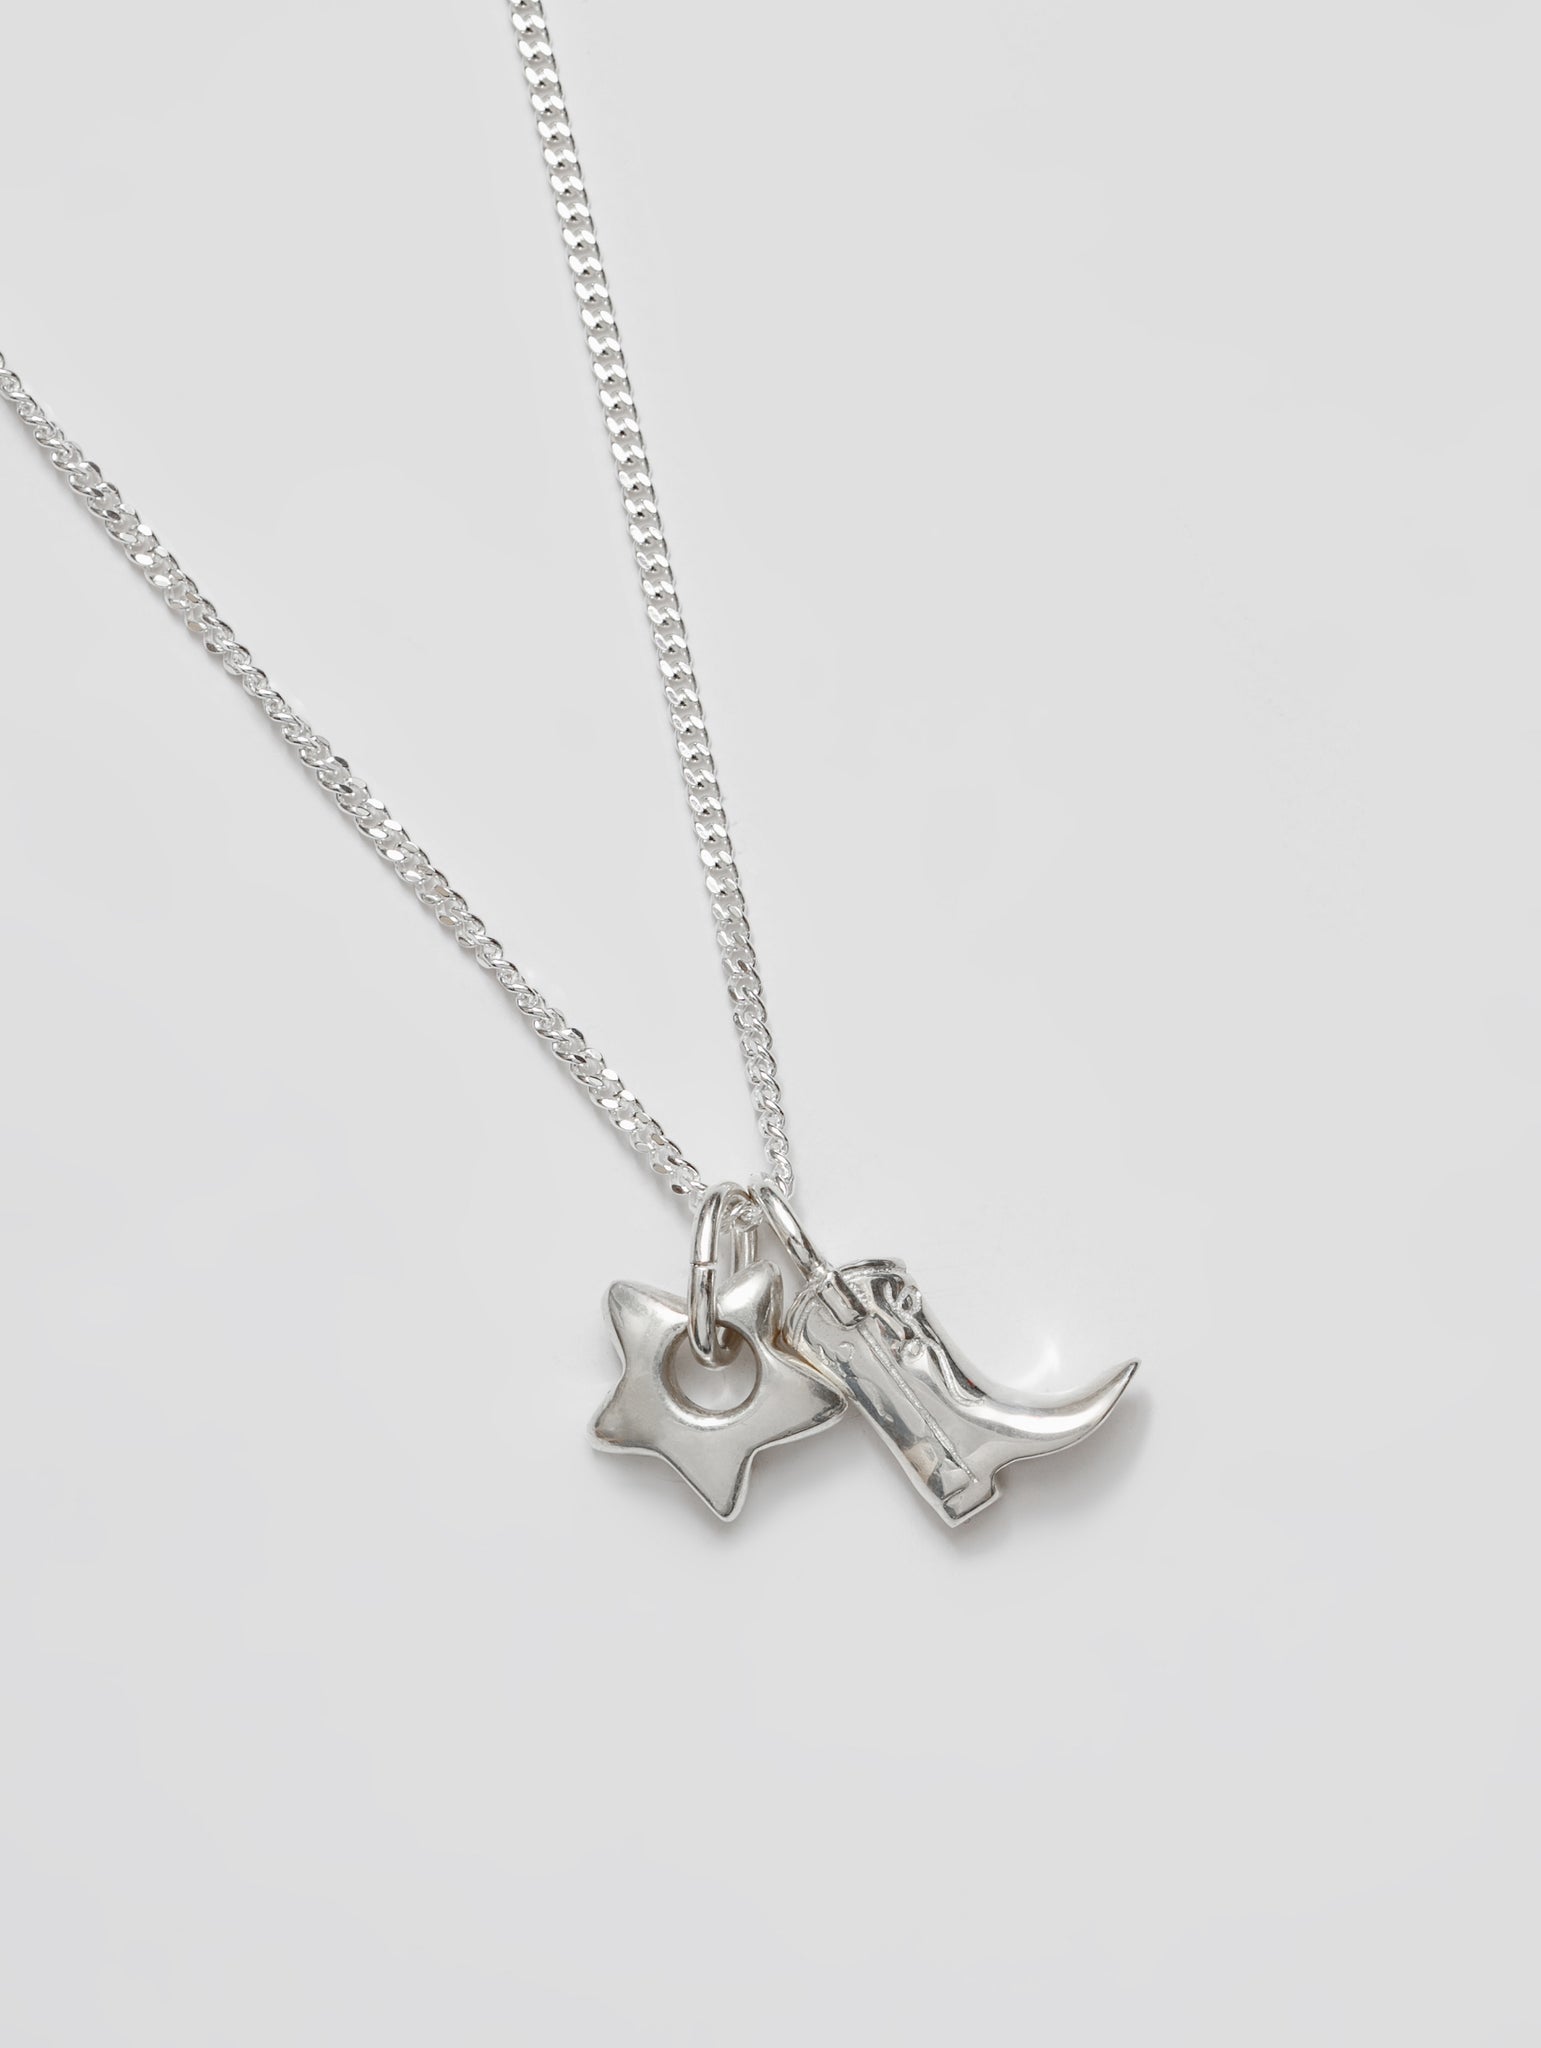 Mini Cowboy Boot and Star Charm Necklace in Sterling Silver